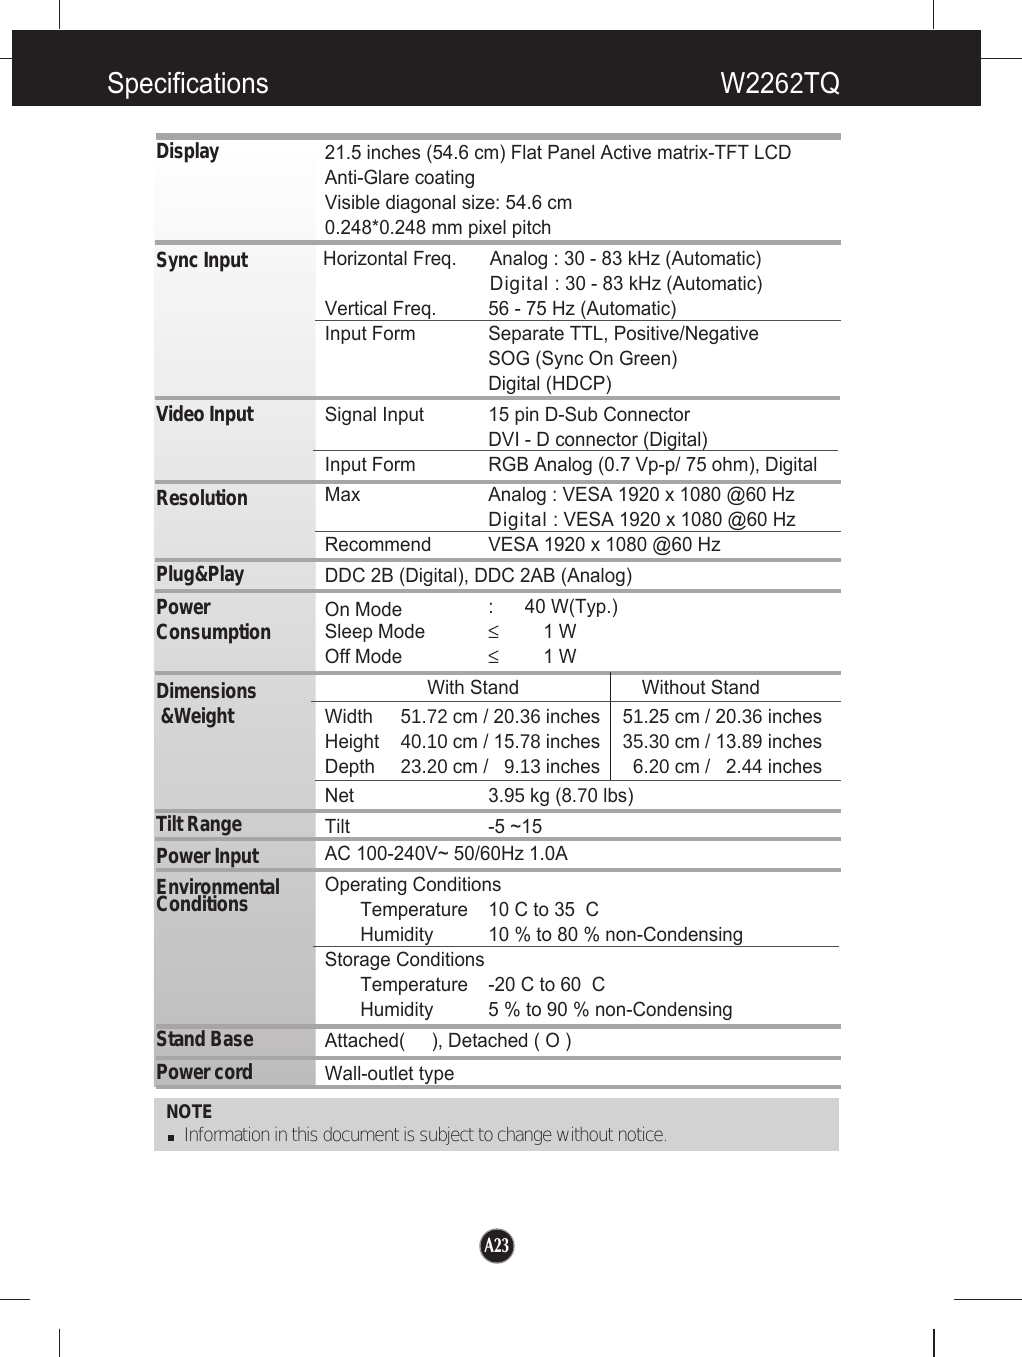 Specifications W2262TQNOTEInformation in this document is subject to change without notice.DisplaySync InputVideo InputResolutionPlug&amp;PlayPowerConsumptionDimensions&amp;WeightTilt RangePower InputEnvironmentalConditionsStand BasePower cord 21.5 inches (54.6 cm) Flat Panel Active matrix-TFT LCD Anti-Glare coatingVisible diagonal size: 54.6 cm0.248*0.248 mm pixel pitchHorizontal Freq. Analog : 30 - 83 kHz (Automatic)Digital : 30 - 83 kHz (Automatic)Vertical Freq. 56 - 75 Hz (Automatic)Input Form Separate TTL, Positive/NegativeSOG (Sync On Green) Digital (HDCP)Signal Input 15 pin D-Sub ConnectorDVI - D connector (Digital)Input Form RGB Analog (0.7 Vp-p/ 75 ohm), DigitalMax Analog : VESA 1920 x 1080 @60 HzDigital : VESA 1920 x 1080 @60 HzRecommend VESA 1920 x 1080 @60 HzDDC 2B (Digital), DDC 2AB (Analog)On Mode : 40 W(Typ.)Sleep Mode ≤1 WOff Mode ≤1 WWith Stand Without StandWidth 51.72 cm / 20.36 inches40.10 cm / 15.78 inches23.20 cm /   9.13 inches5 .25 cm / 20.36 inches35.30 cm / 13.89 inches6.20 cm /   2.44 inches1HeightDepthNet 3.95 kg (8.70 lbs)Tilt -5 ~15 AC 100-240V~ 50/60Hz 1.0A Operating ConditionsTemperature 10 C to 35  CHumidity 10 % to 80 % non-CondensingStorage ConditionsTemperature -20 C to 60  CHumidity 5 % to 90 % non-CondensingAttached(     ), Detached ( O )Wall-outlet type A23